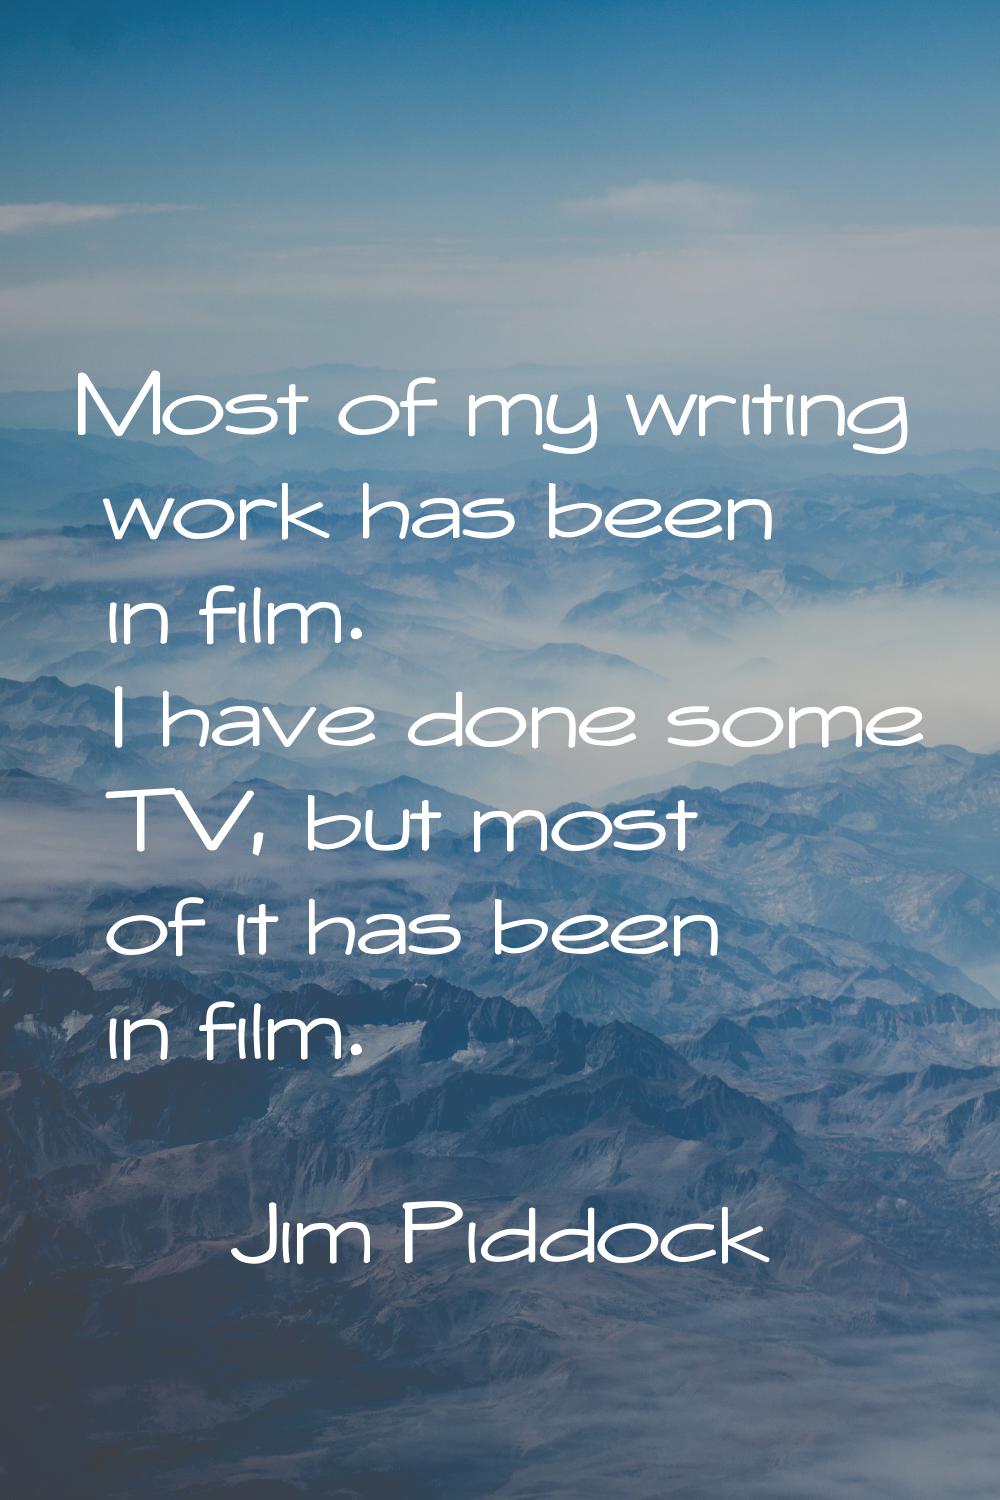 Most of my writing work has been in film. I have done some TV, but most of it has been in film.